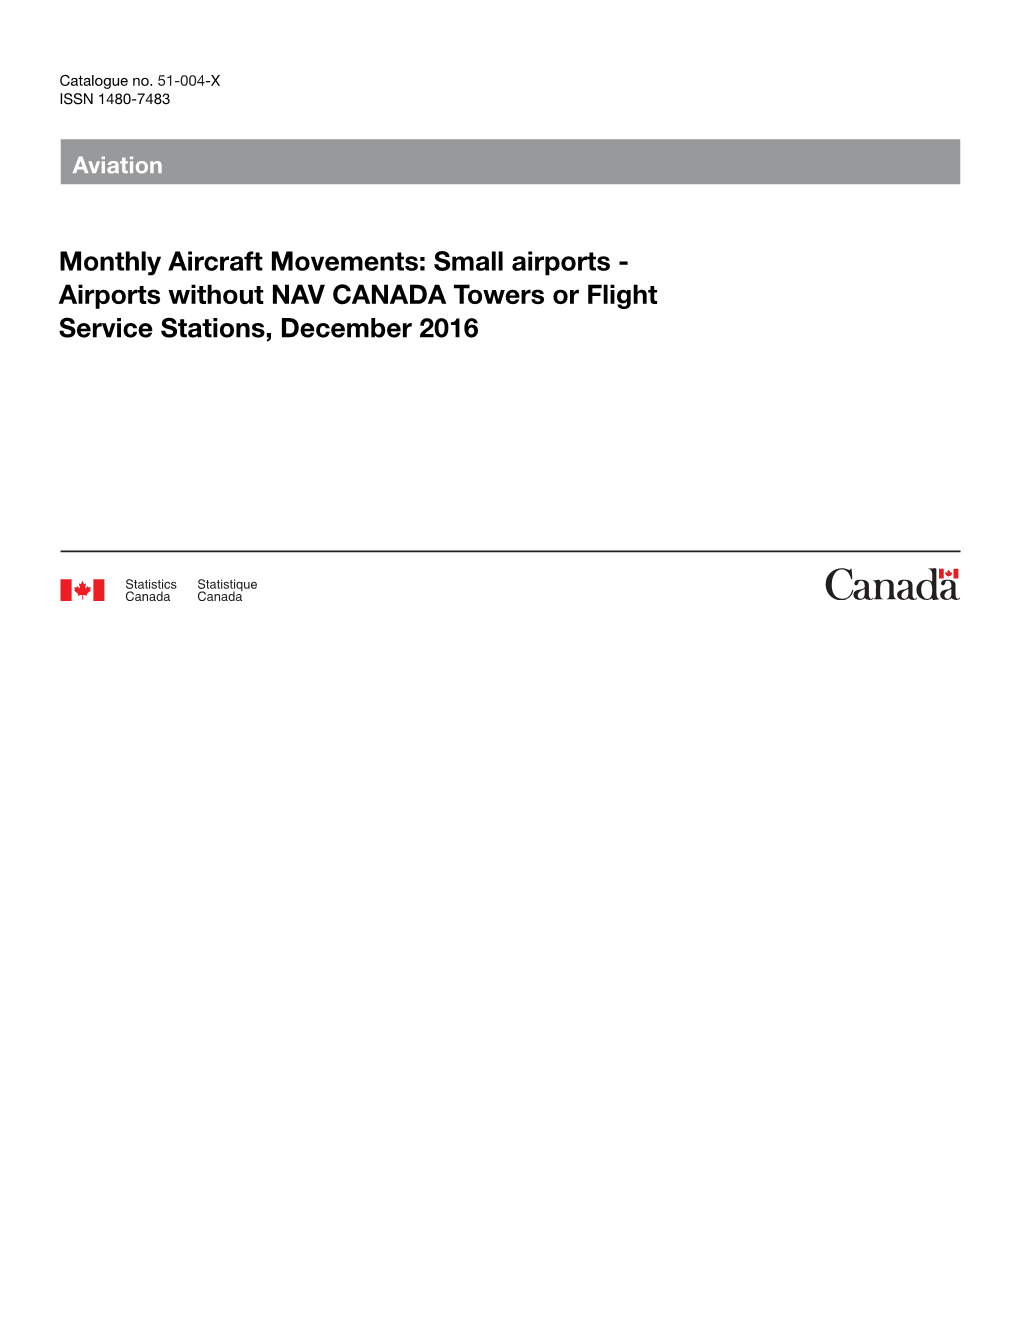 Monthly Aircraft Movements: Small Airports - Airports Without NAV CANADA Towers Or Flight Service Stations, December 2016